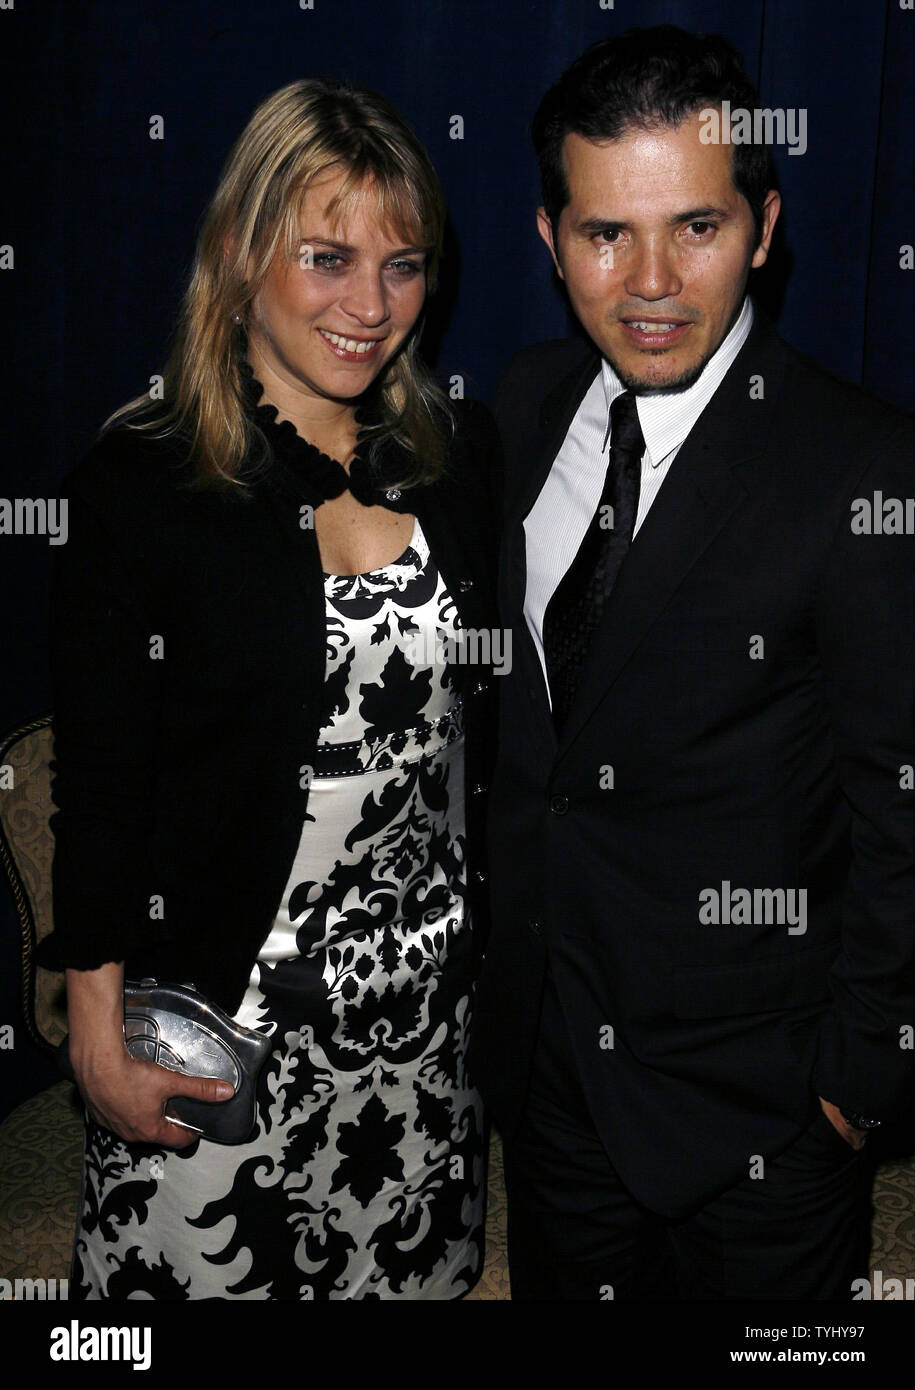 John Leguizamo and wife Justine Maurer arrive backstage for the Jackie Robinson Foundation annual awards dinner at the Waldorf Astoria in New York City on March 5, 2007. Spike Lee was honored for his years of commitment to social progress.   (UPI Photo/John Angelillo) Stock Photo